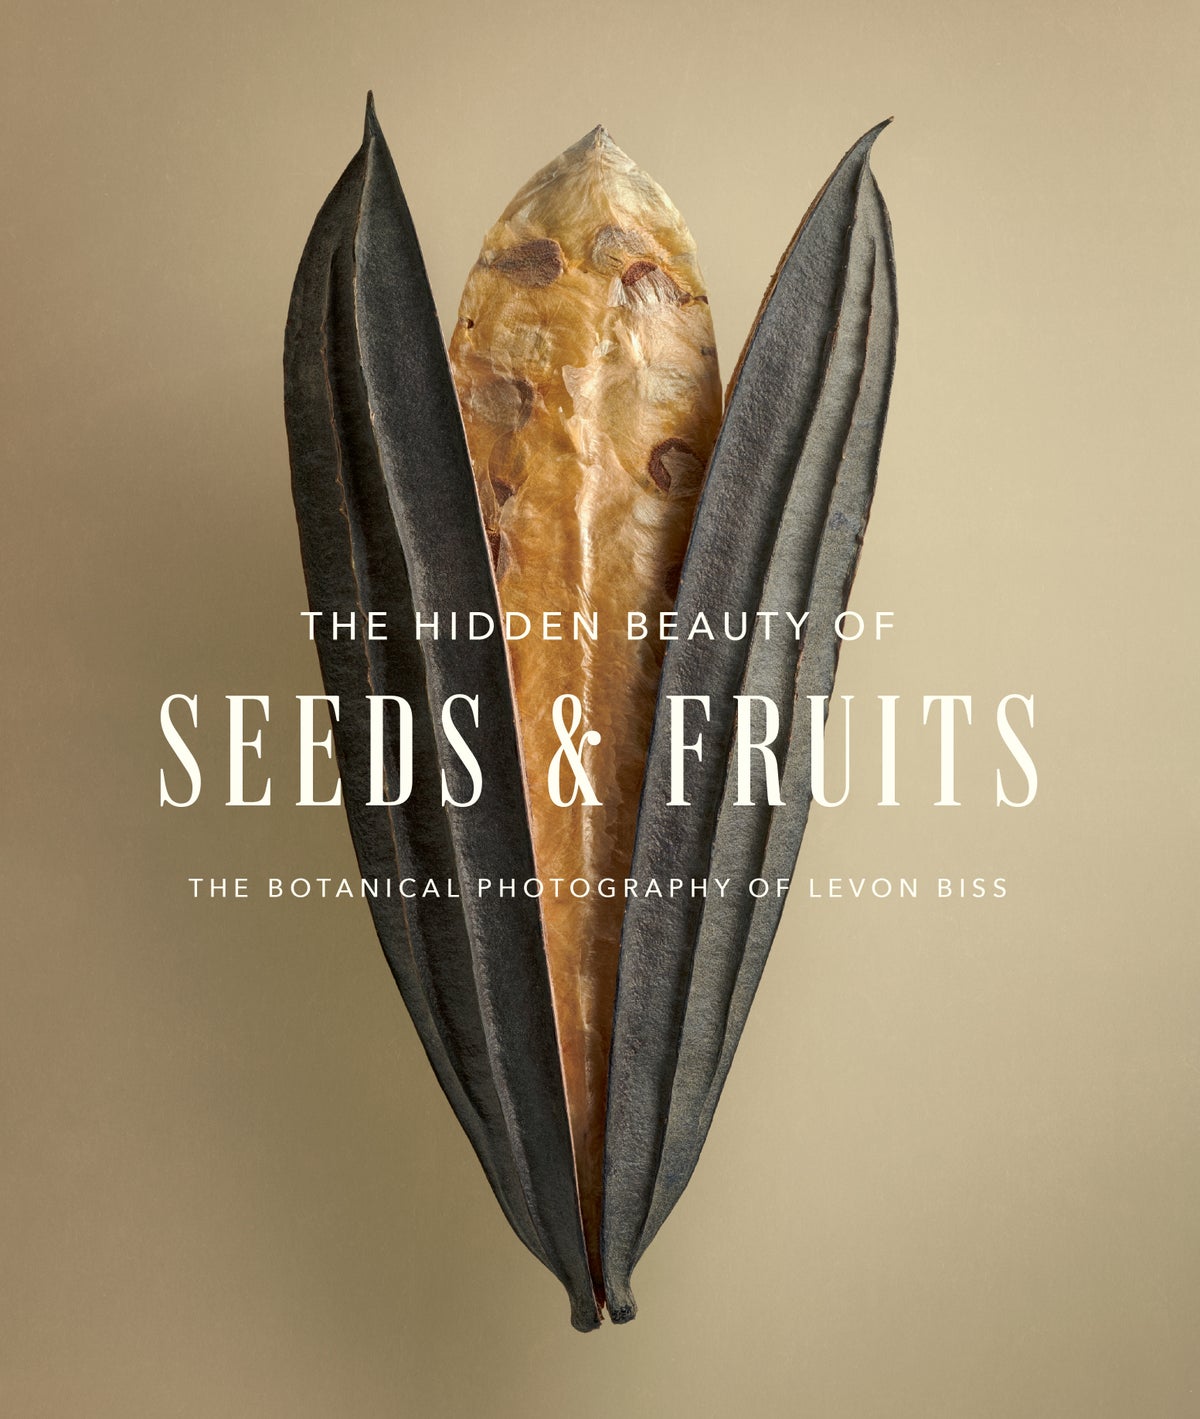 The Hidden Beauty of Seeds & Fruits: The Botanical Photography of Levon Biss book cover.